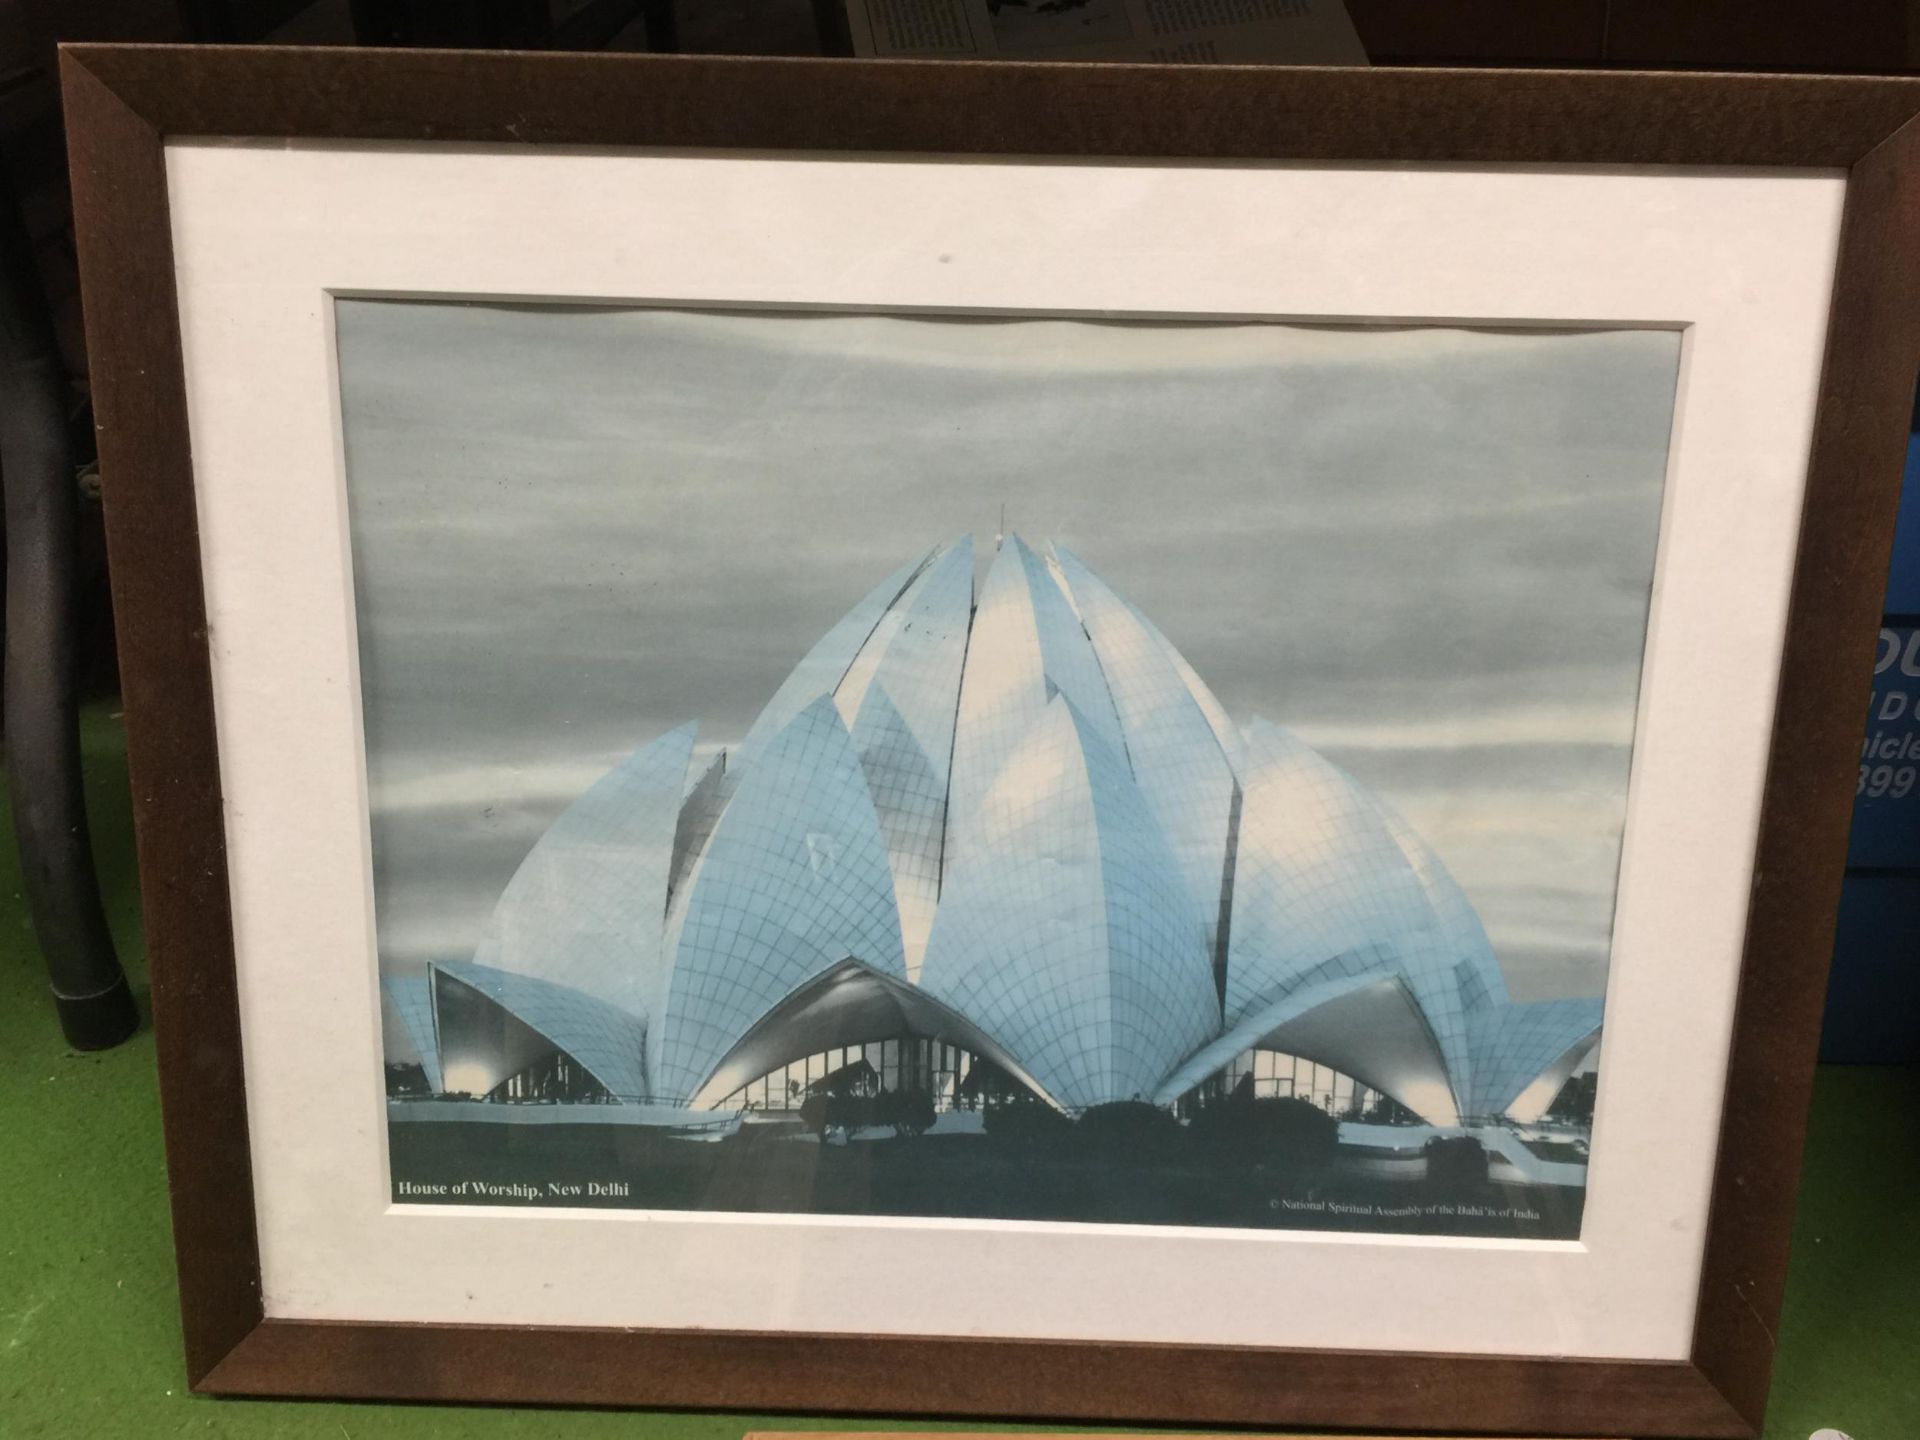 A GROUP OF FRAMED PRINTS, BIRDS, STILL LIFE, HOUSE OF WORSHIP, NEW DELHI ETC - Image 3 of 5